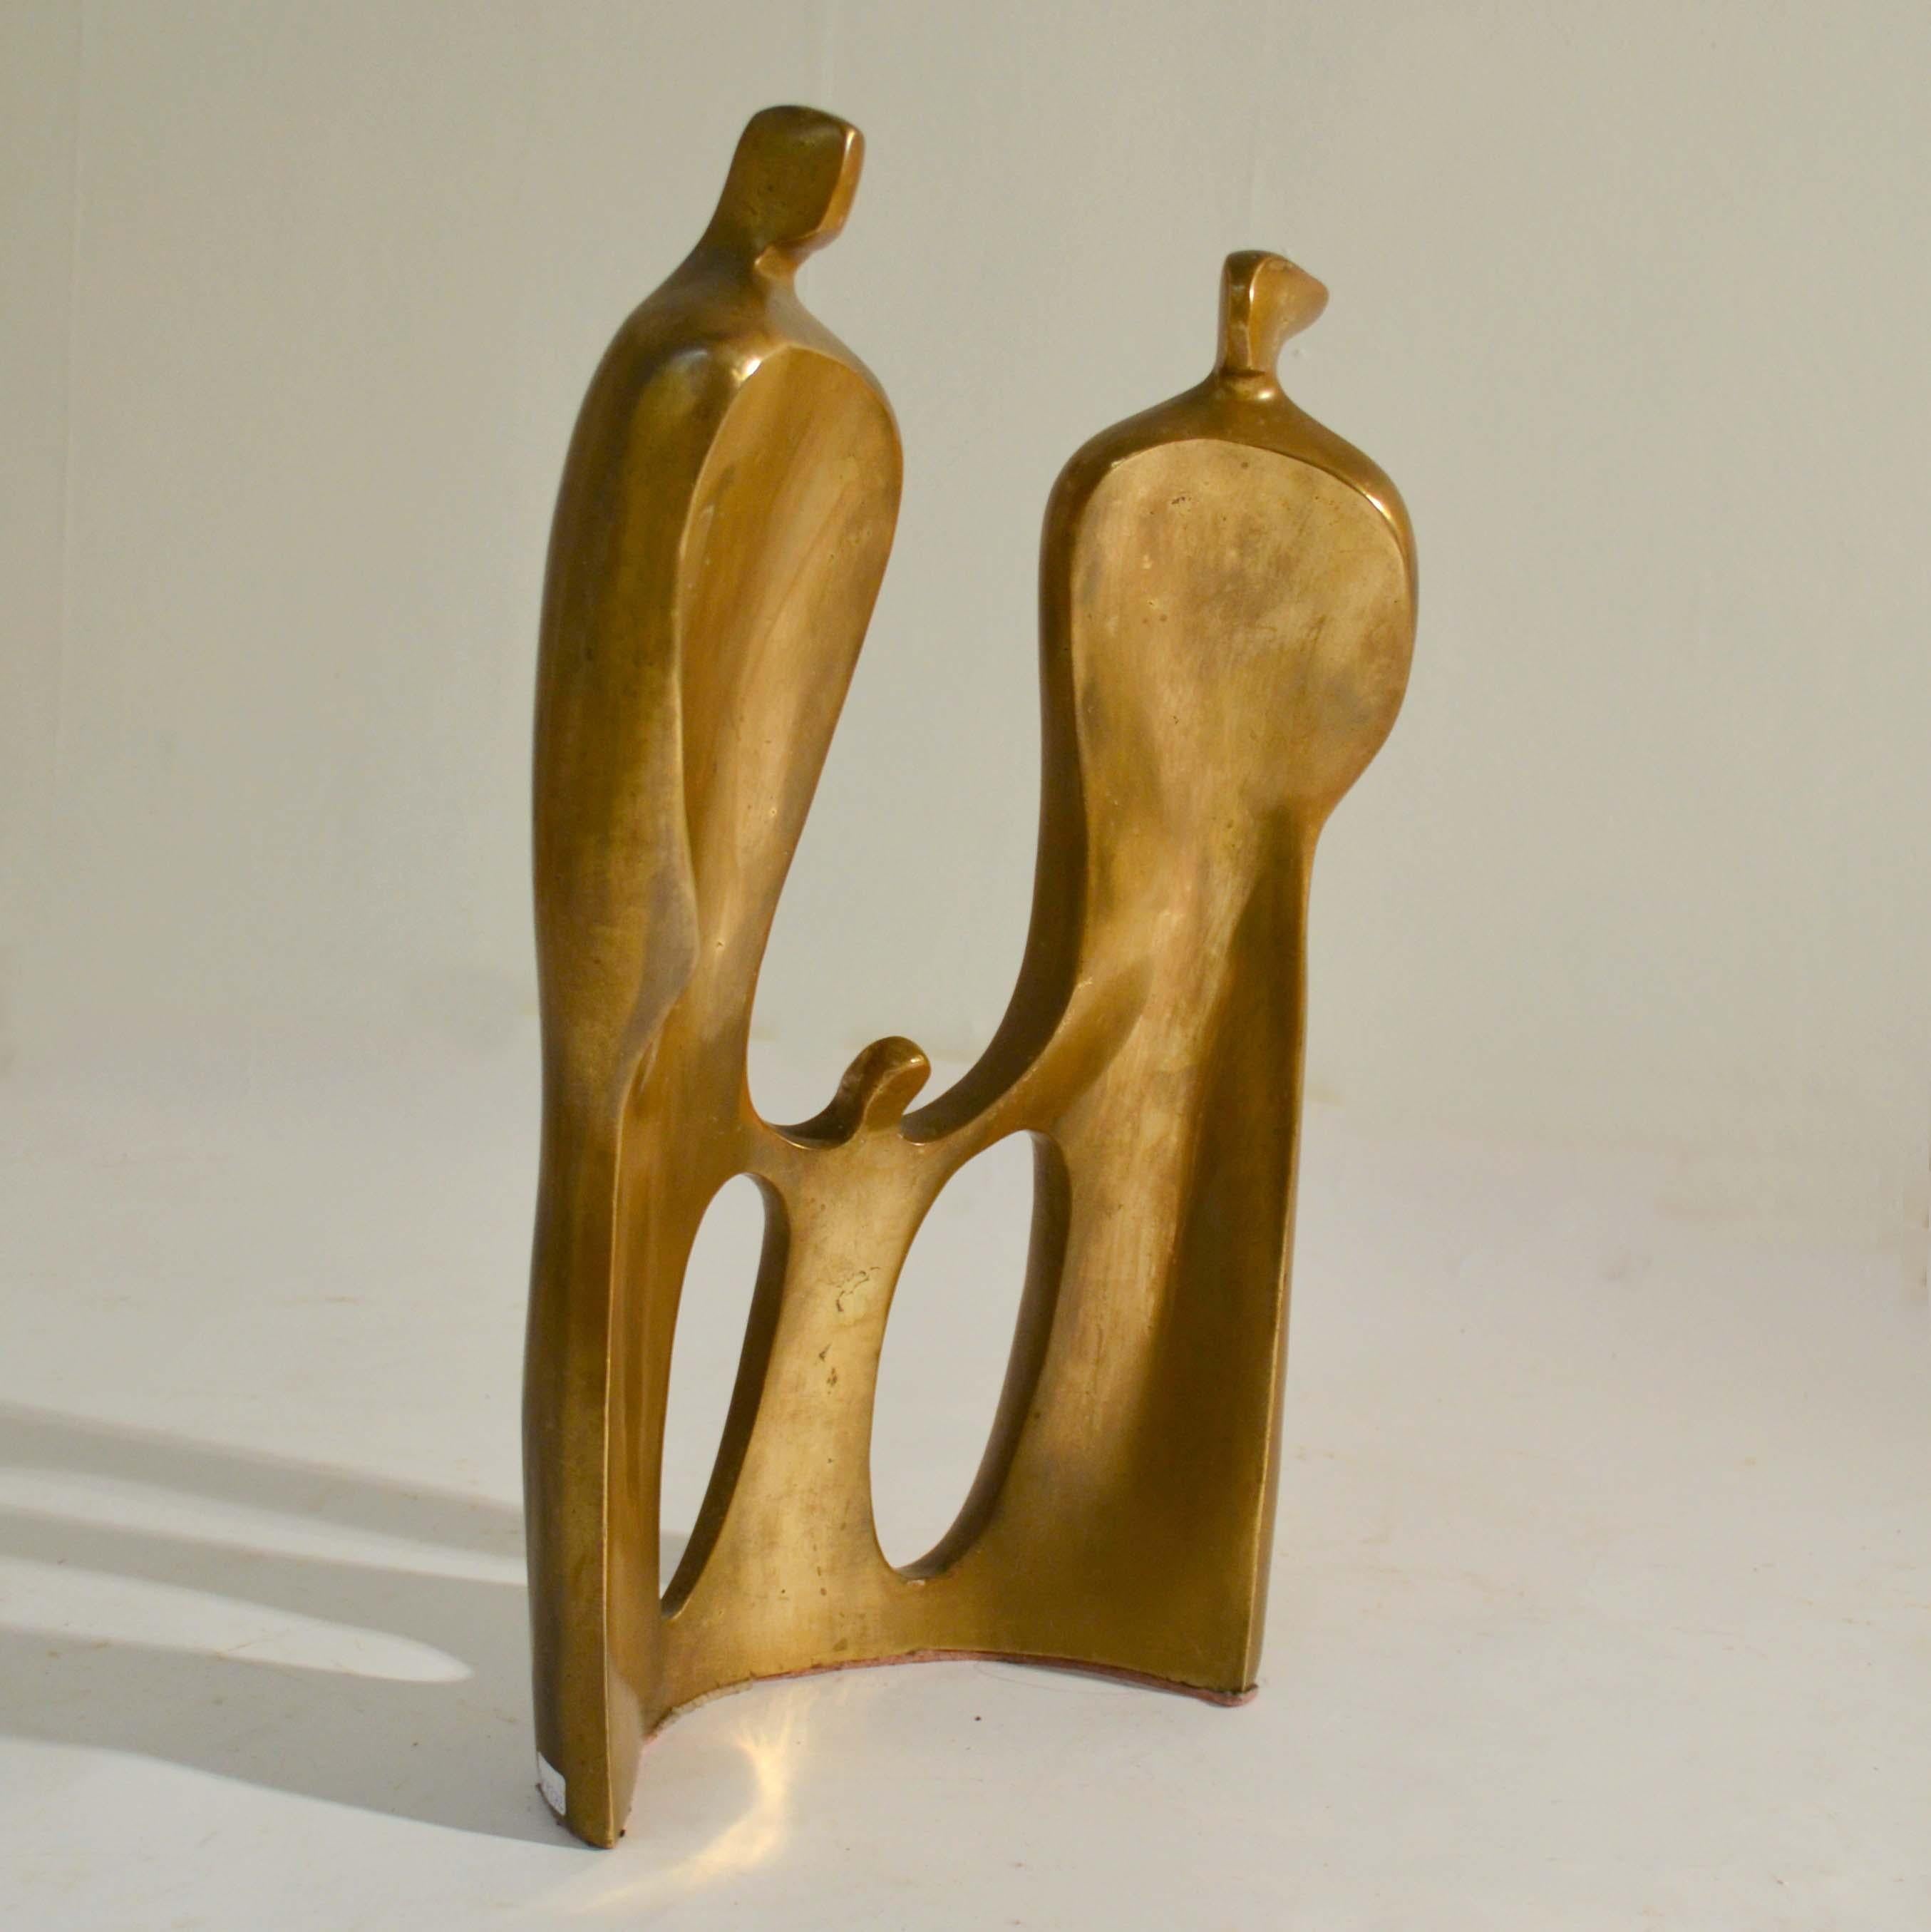 European Large Figurative Bronze Sculpture of Family by Maria Guernova, 1985 For Sale